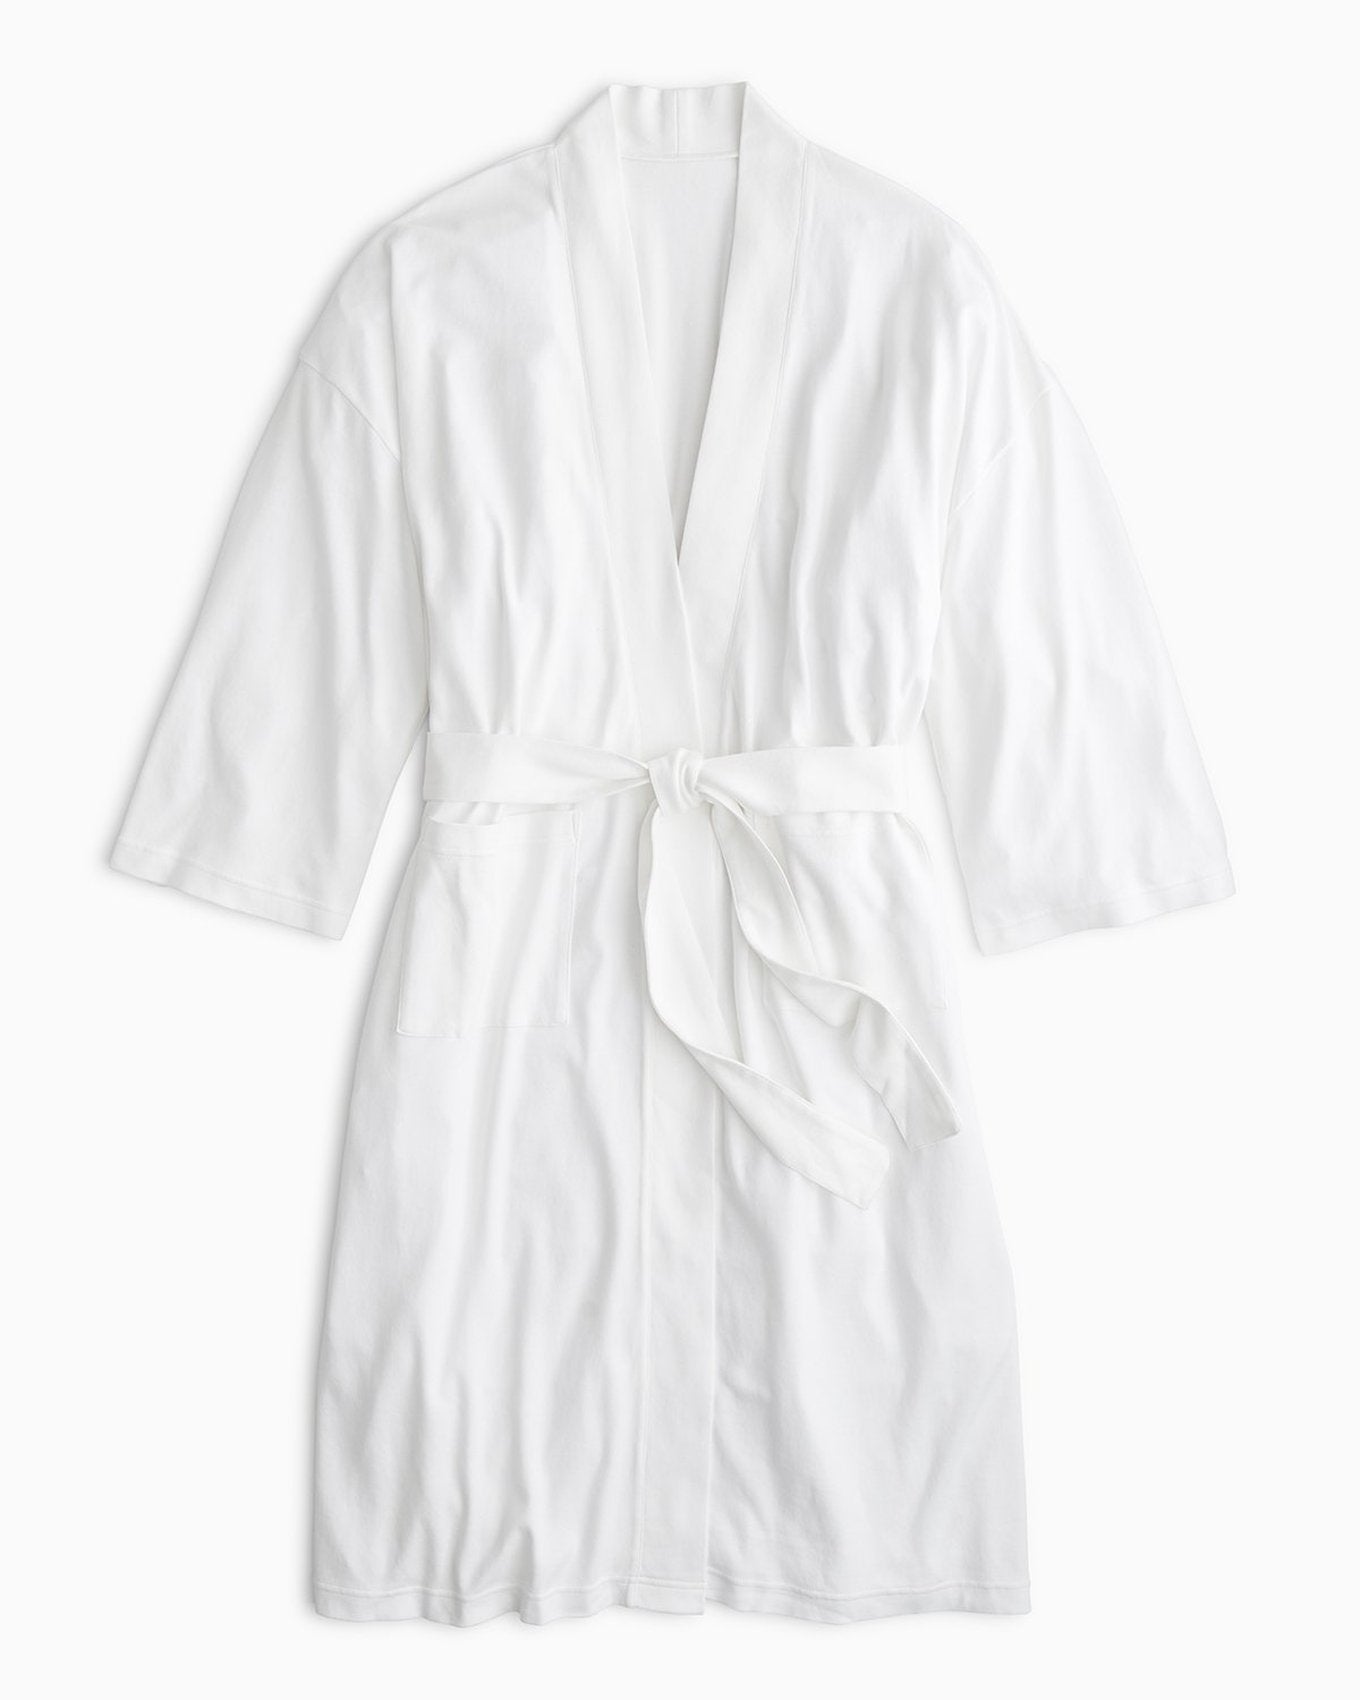 YesAnd Organic Knit Robe Knit Robe in color Bright White and shape robe